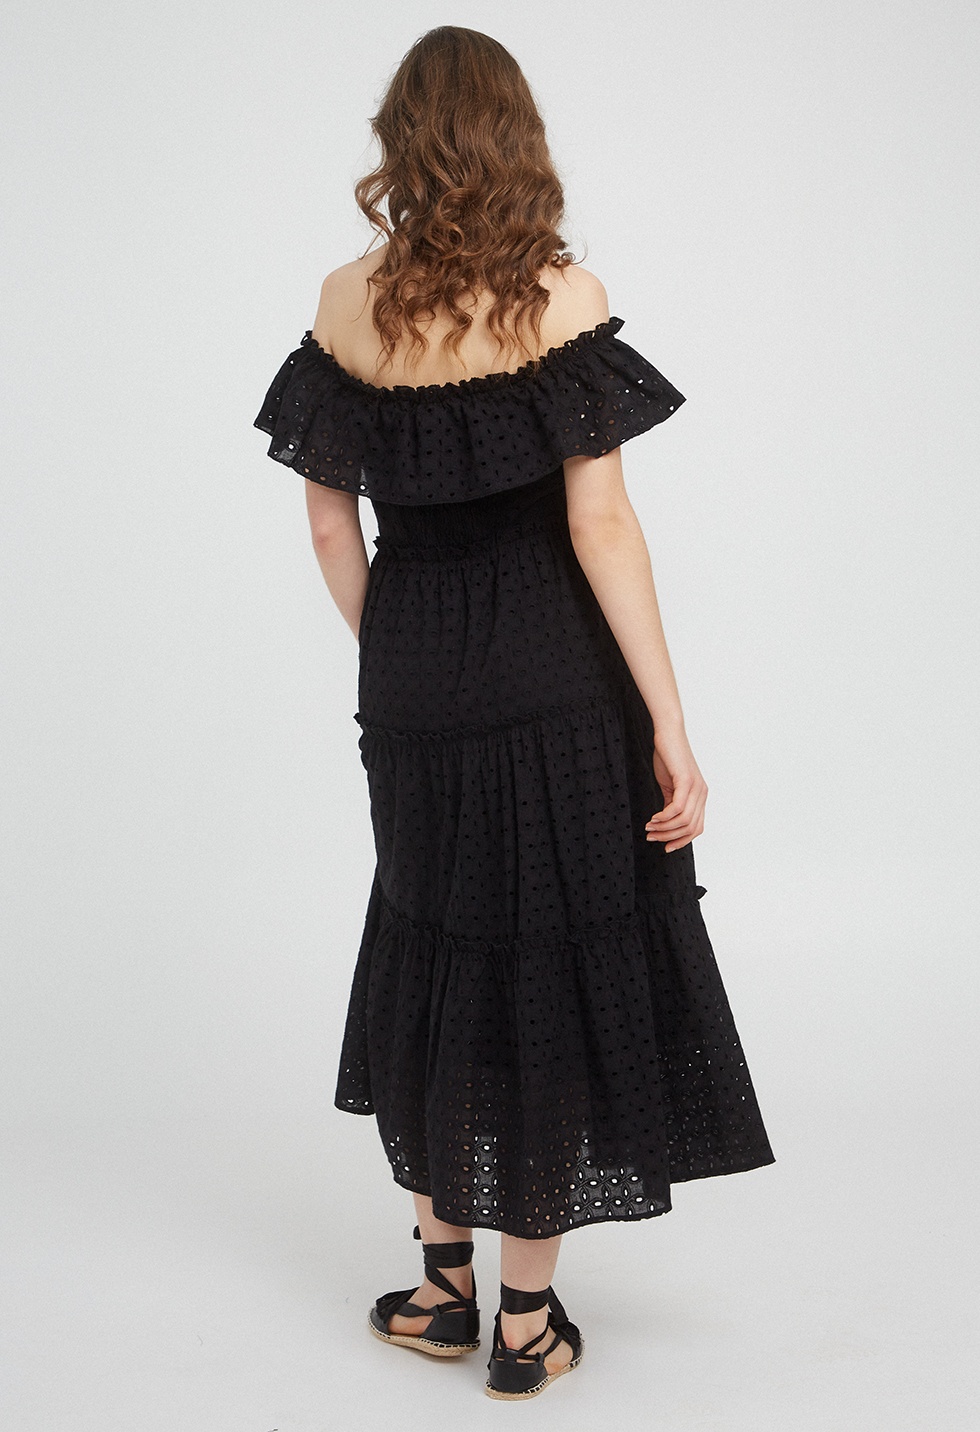 Midi dress with cutwork embroidery